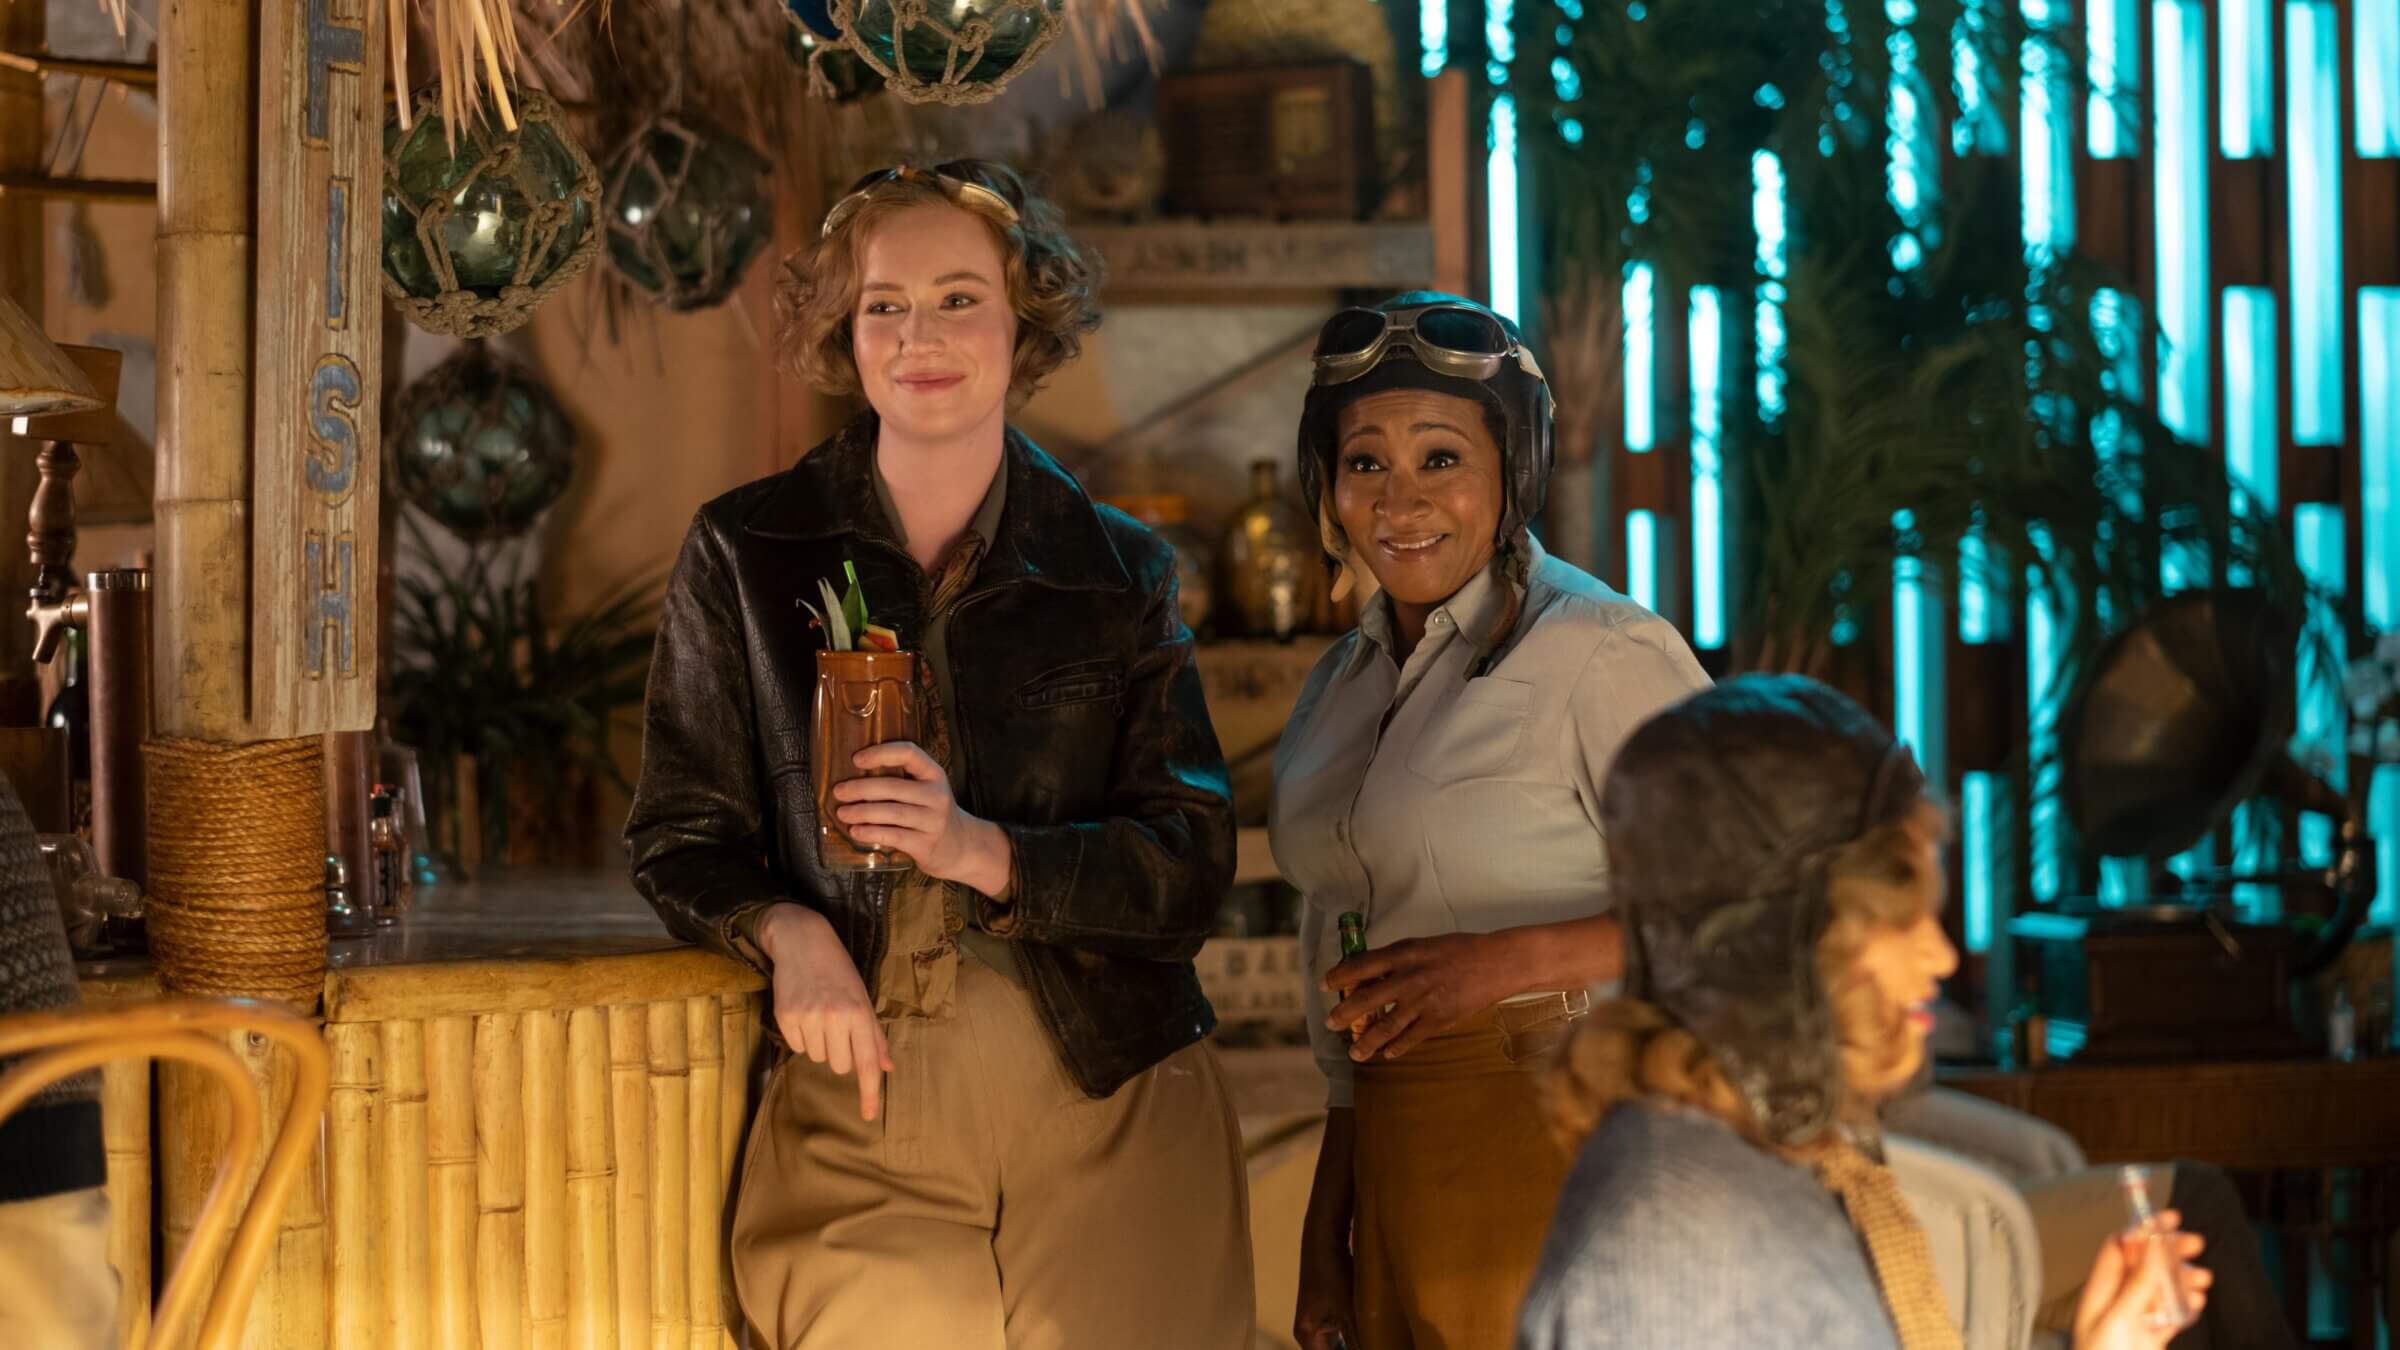 Amelia (Hannah Einbinder) and Bessie (Wanda Sykes) enjoy a drink in <i>The History of the World, Part II.</i>